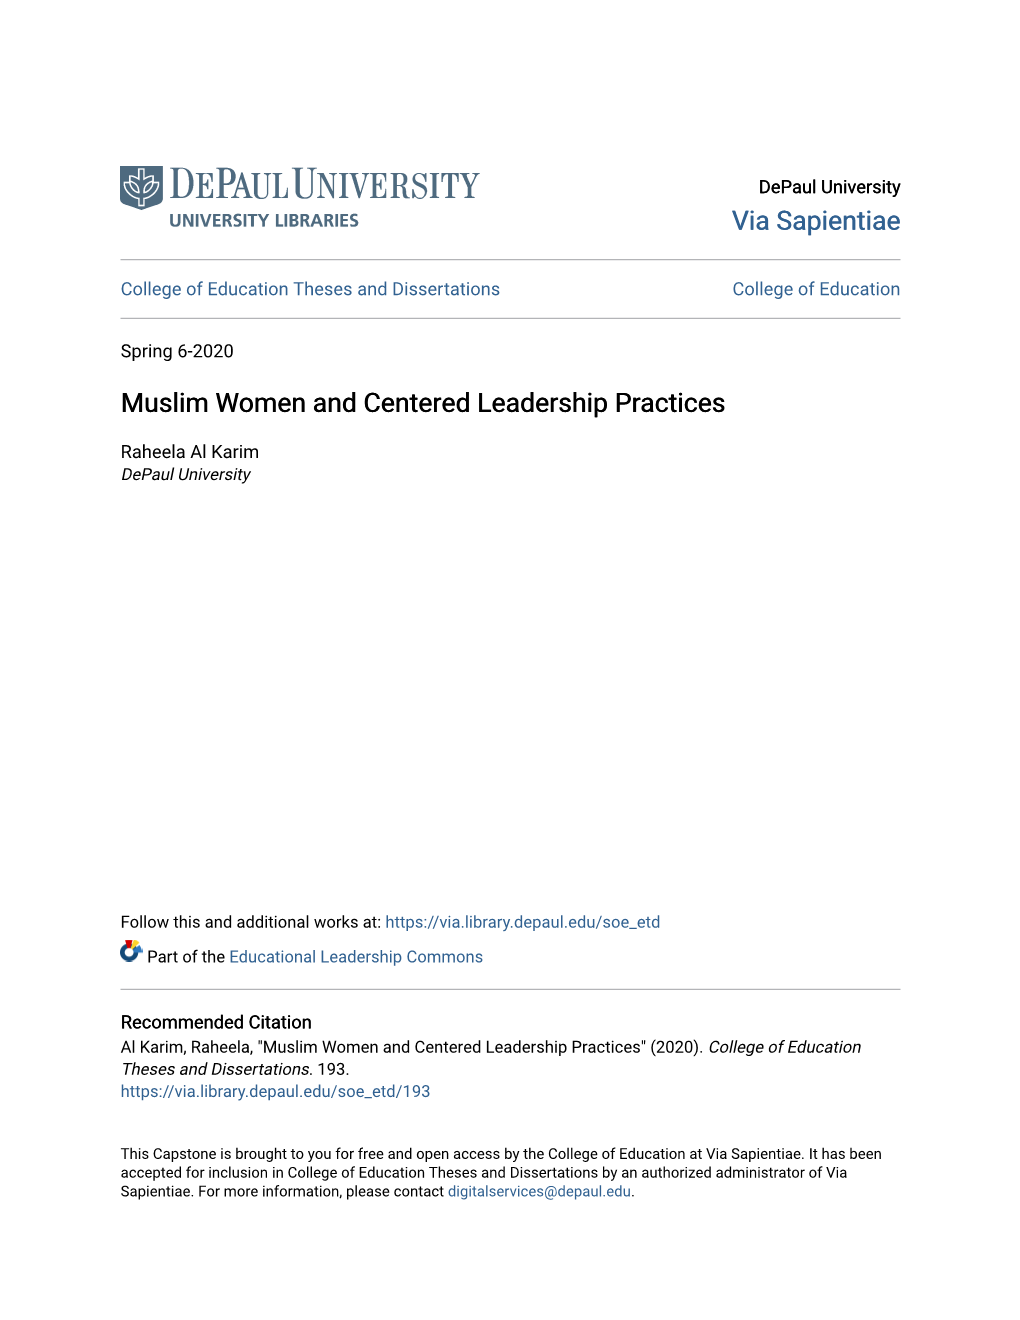 Muslim Women and Centered Leadership Practices